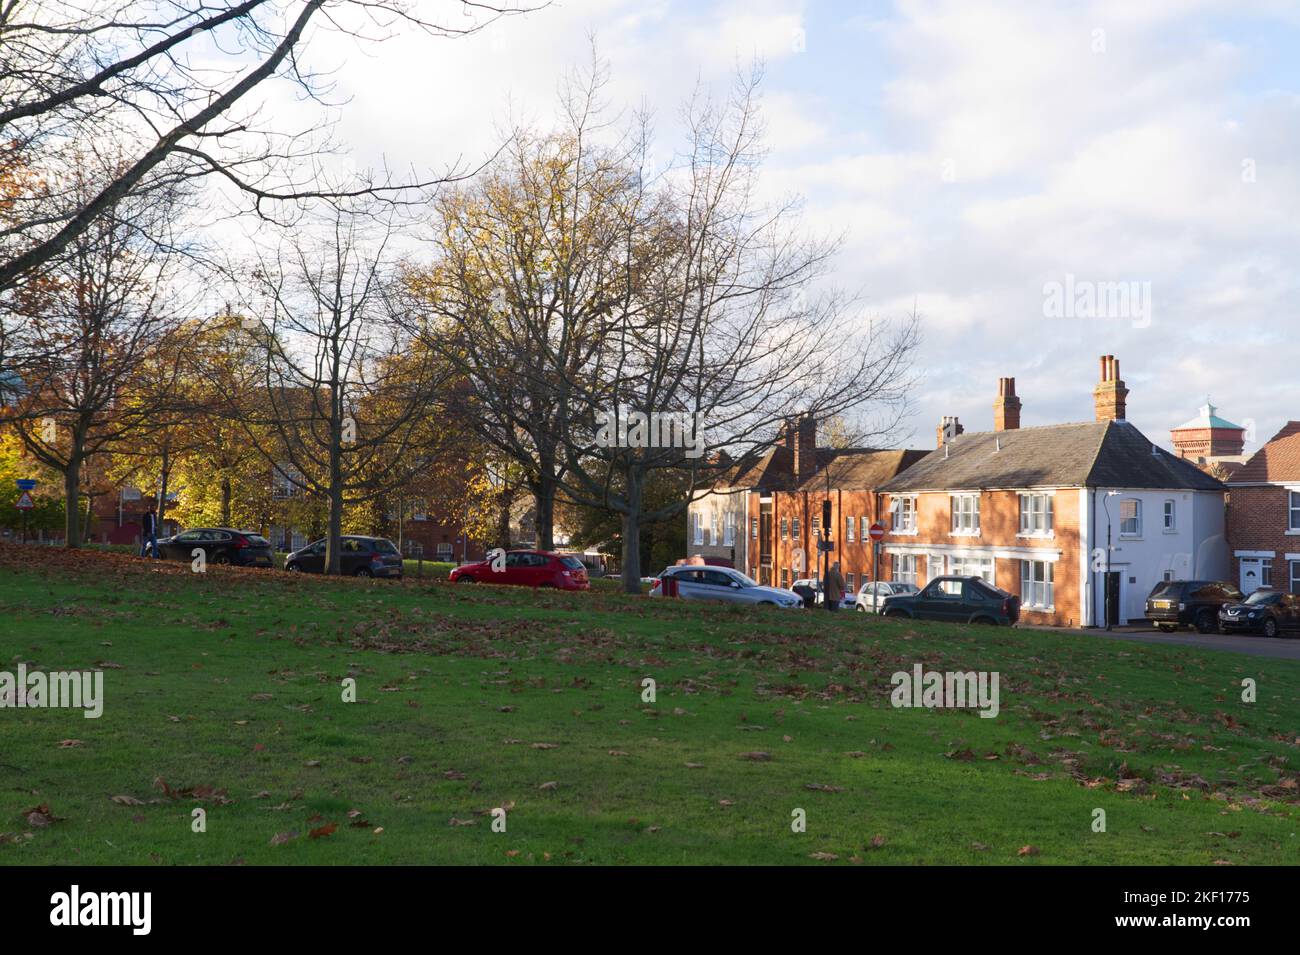 St John's Green in Colchester, Essex, the area around St John's Abbey gatehouse. Stock Photo